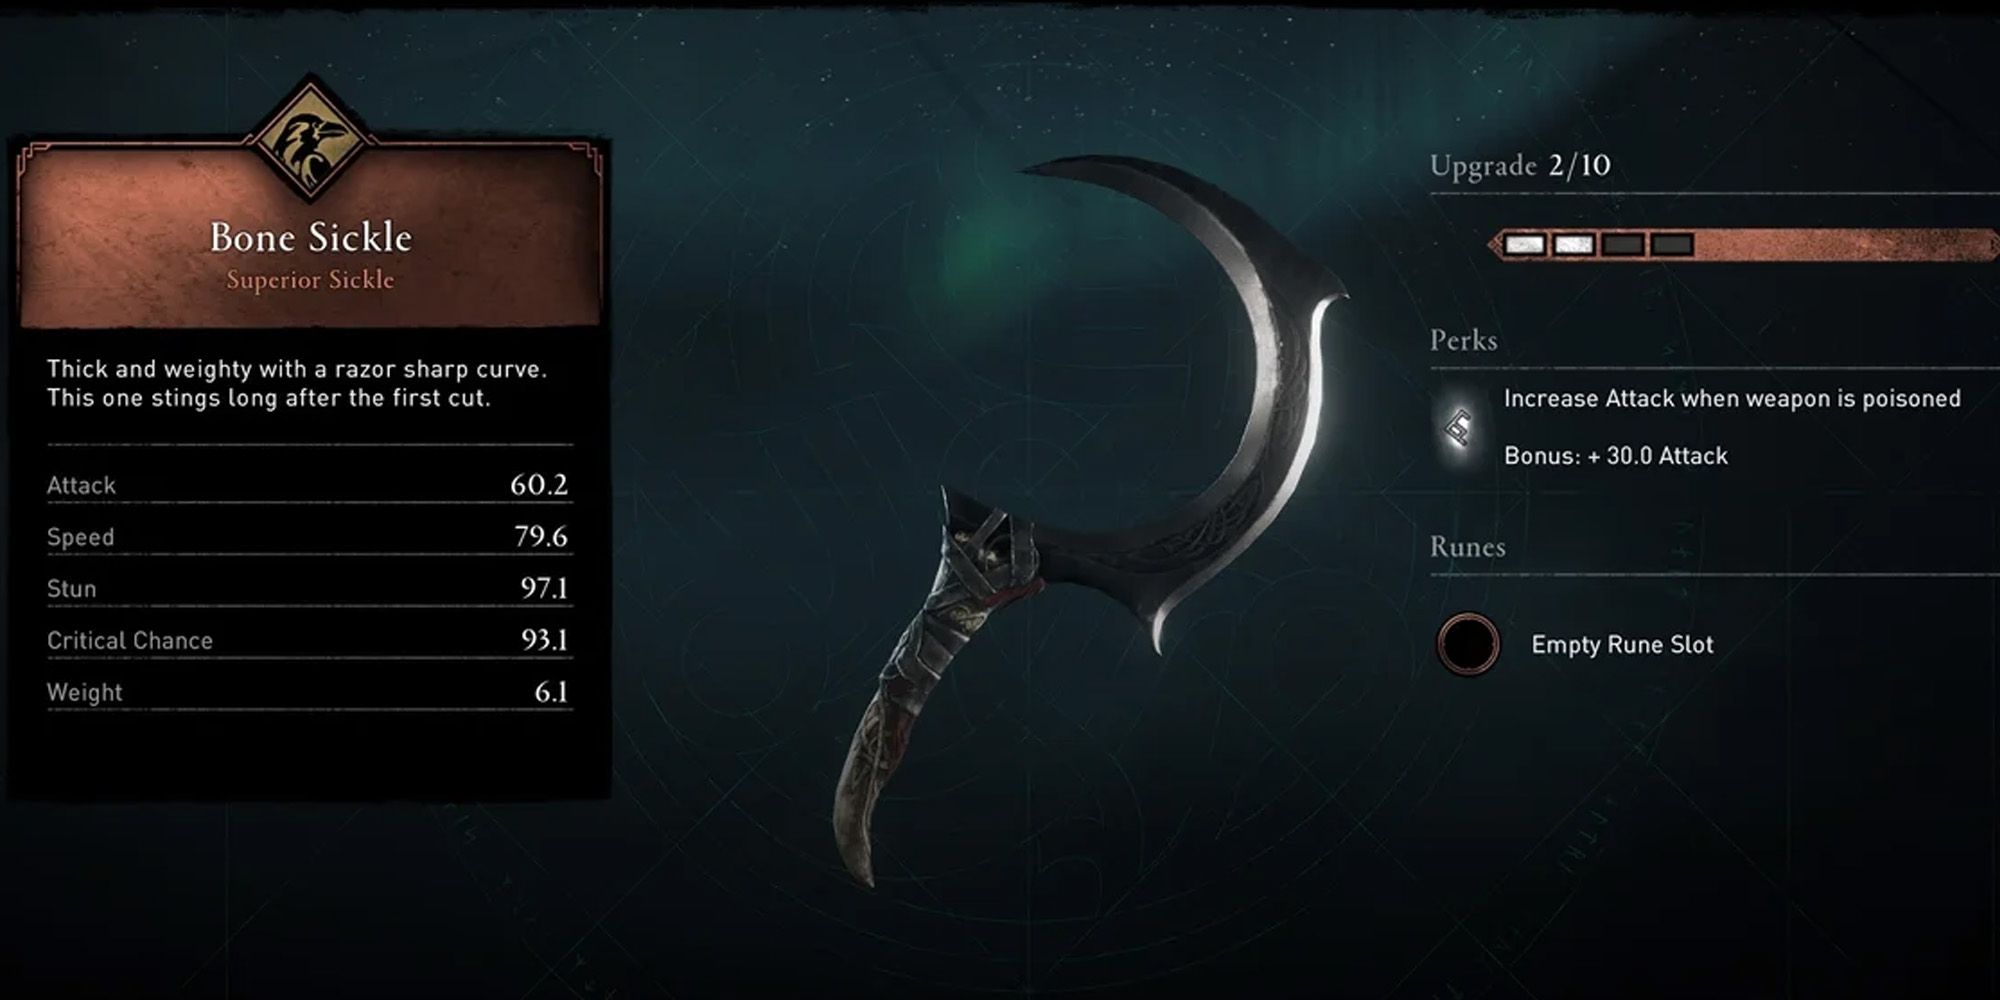 Image of the Bone Sickle and its stats in Assassin's Creed Valhalla